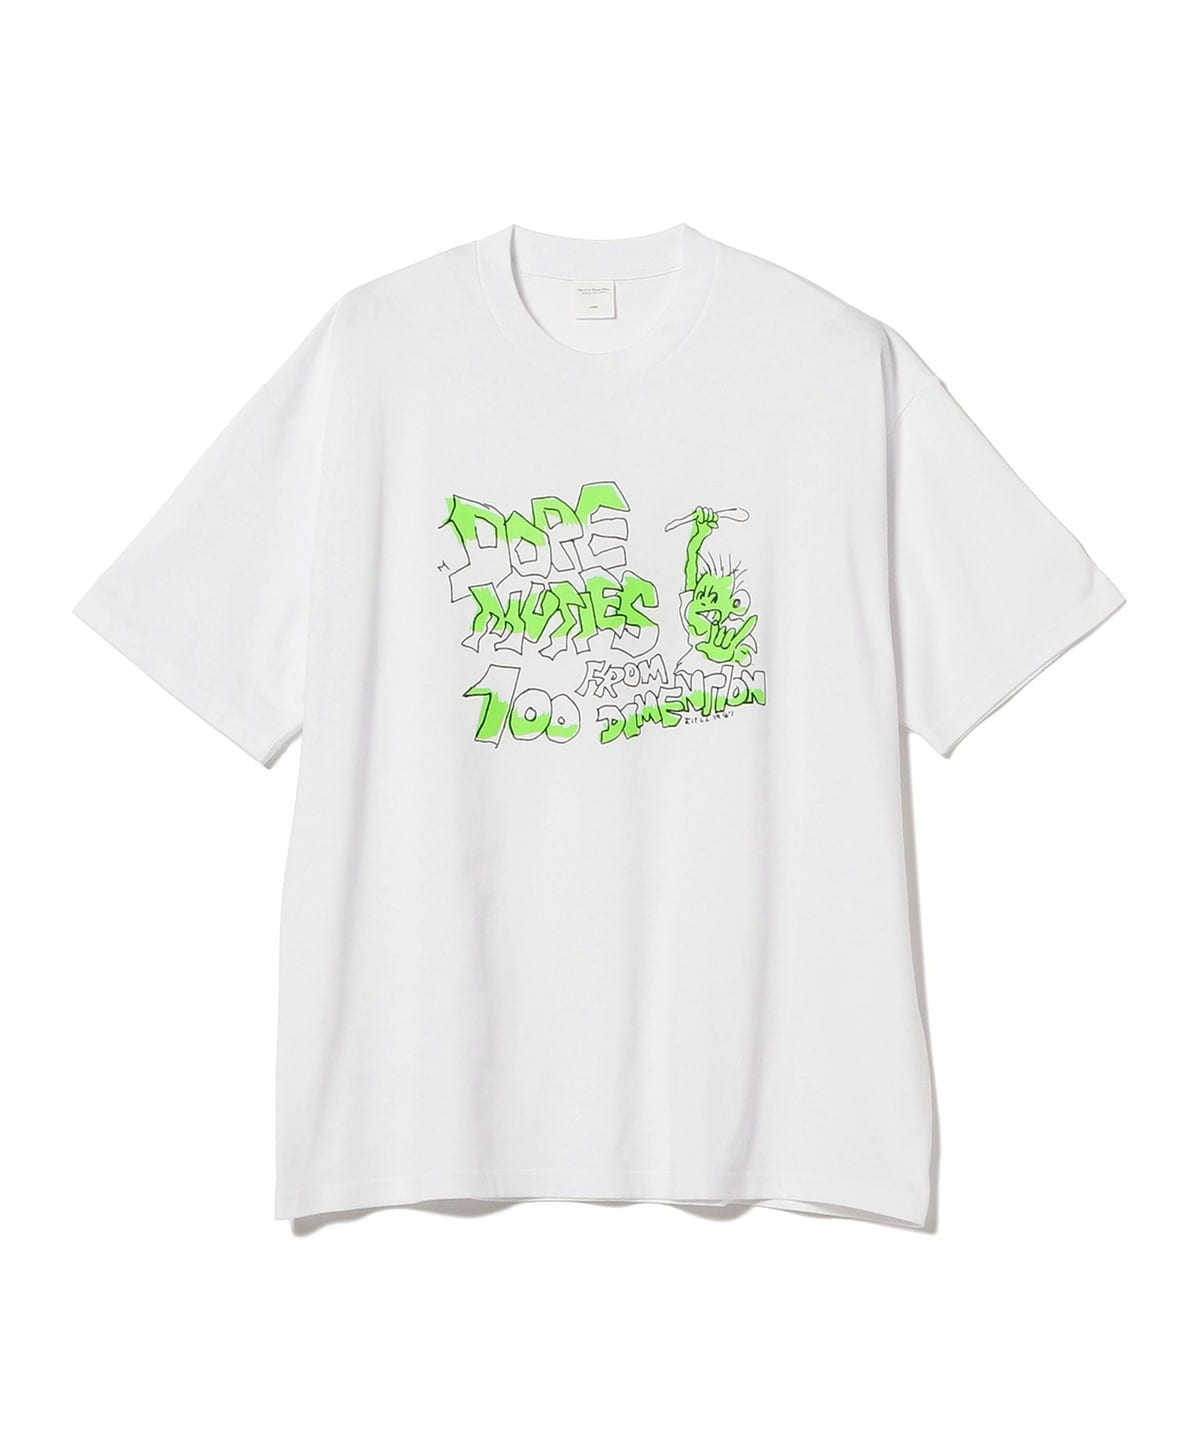 BEAMS T（ビームスT）【アウトレット】Tea Club Scheme Team × SPANK4 / DOPE MUTIES FROM 100  DIMENTION print short sleeve T-shirt（Tシャツ・カットソー プリントTシャツ）通販｜BEAMS